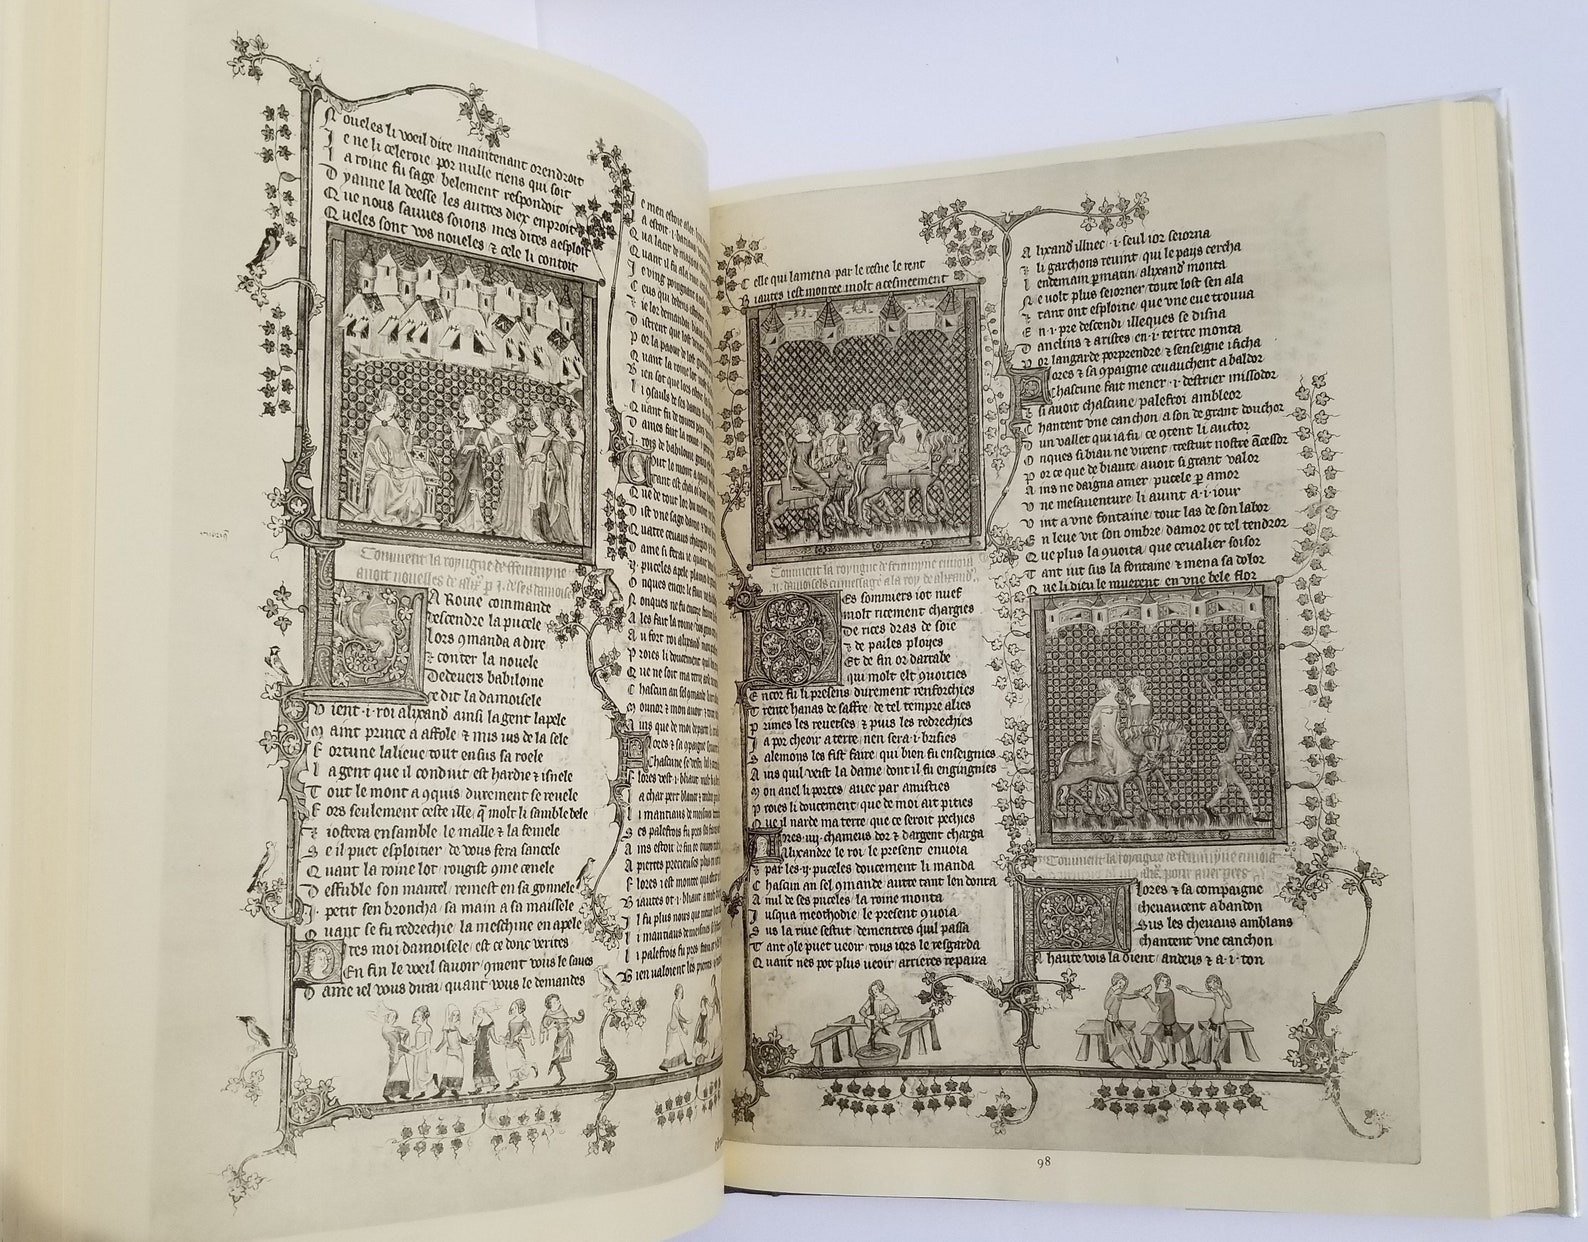 The Romance of Alexander: A Collotype Facsimile of Ms. Bodley - Etsy